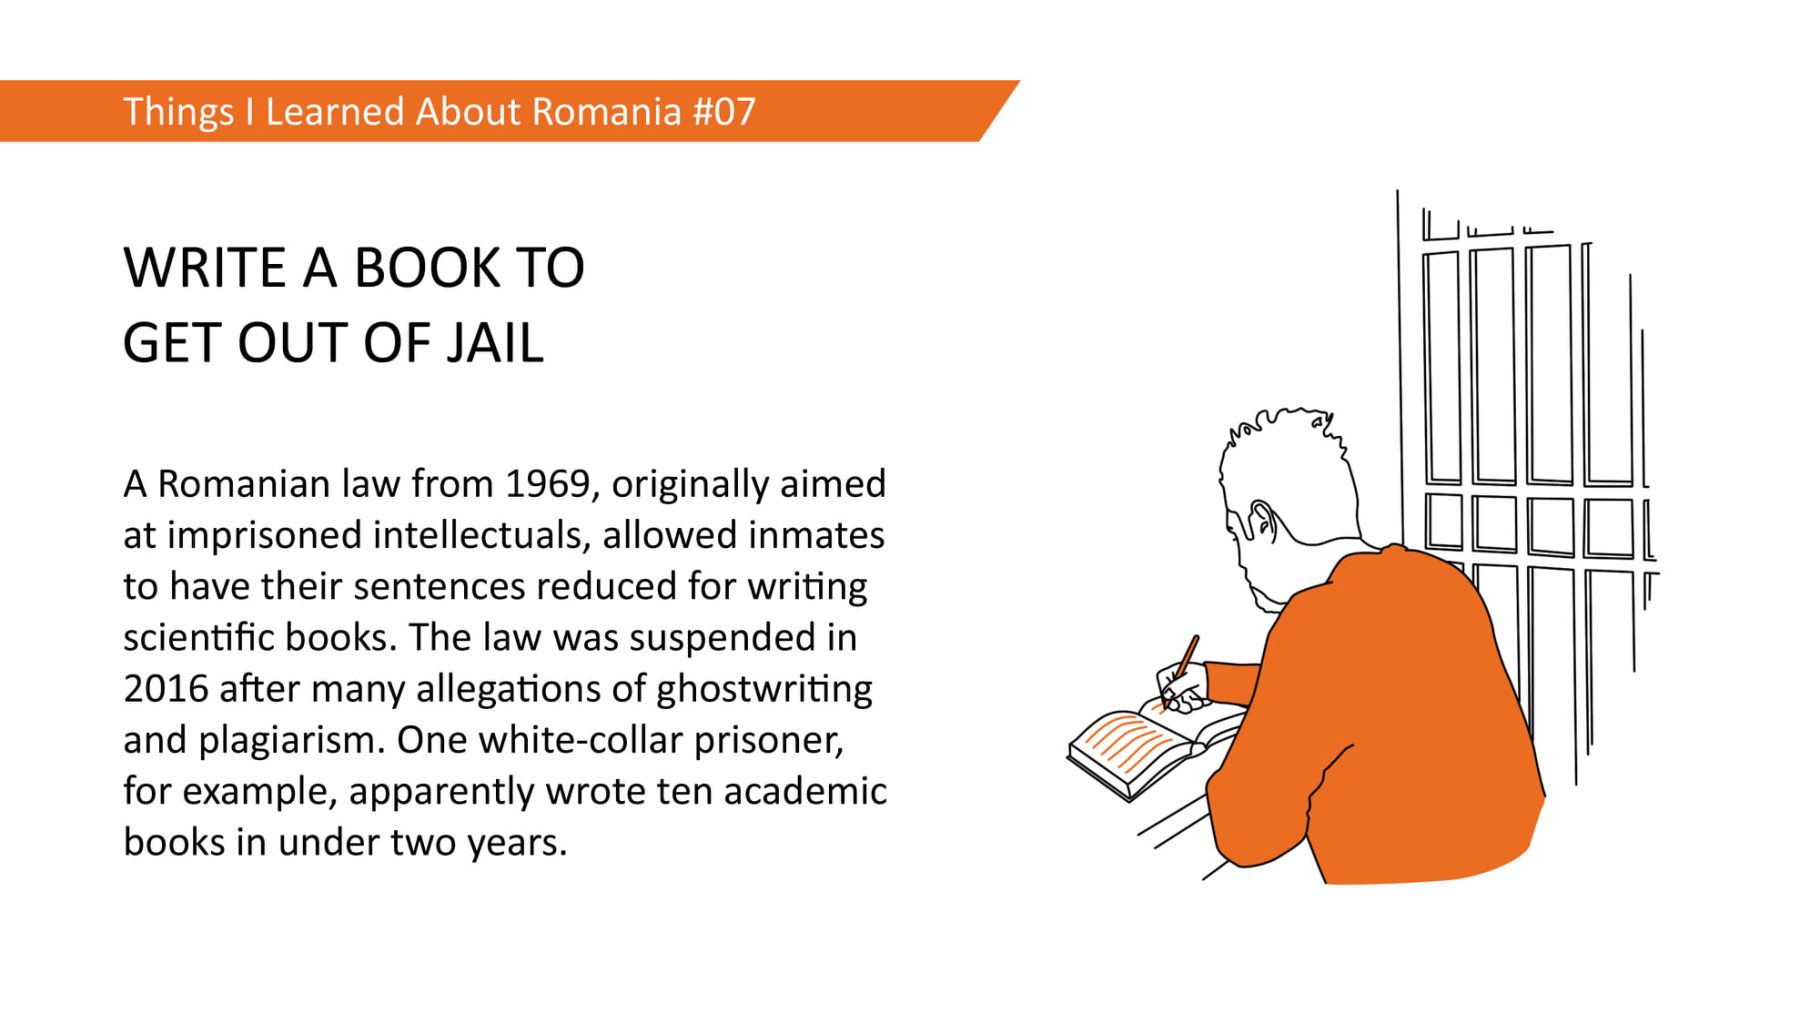 WRITE A BOOK TO GET OUT OF JAIL: A Romanian law from 1969, originally aimed at imprisoned intellectuals, allowed inmates to have their sentences reduced for writing scientific books. The law was suspended in 2016 after many allegations of ghostwriting and plagiarism. One white-collar prisoner, for example, apparently wrote ten academic books in under two years.